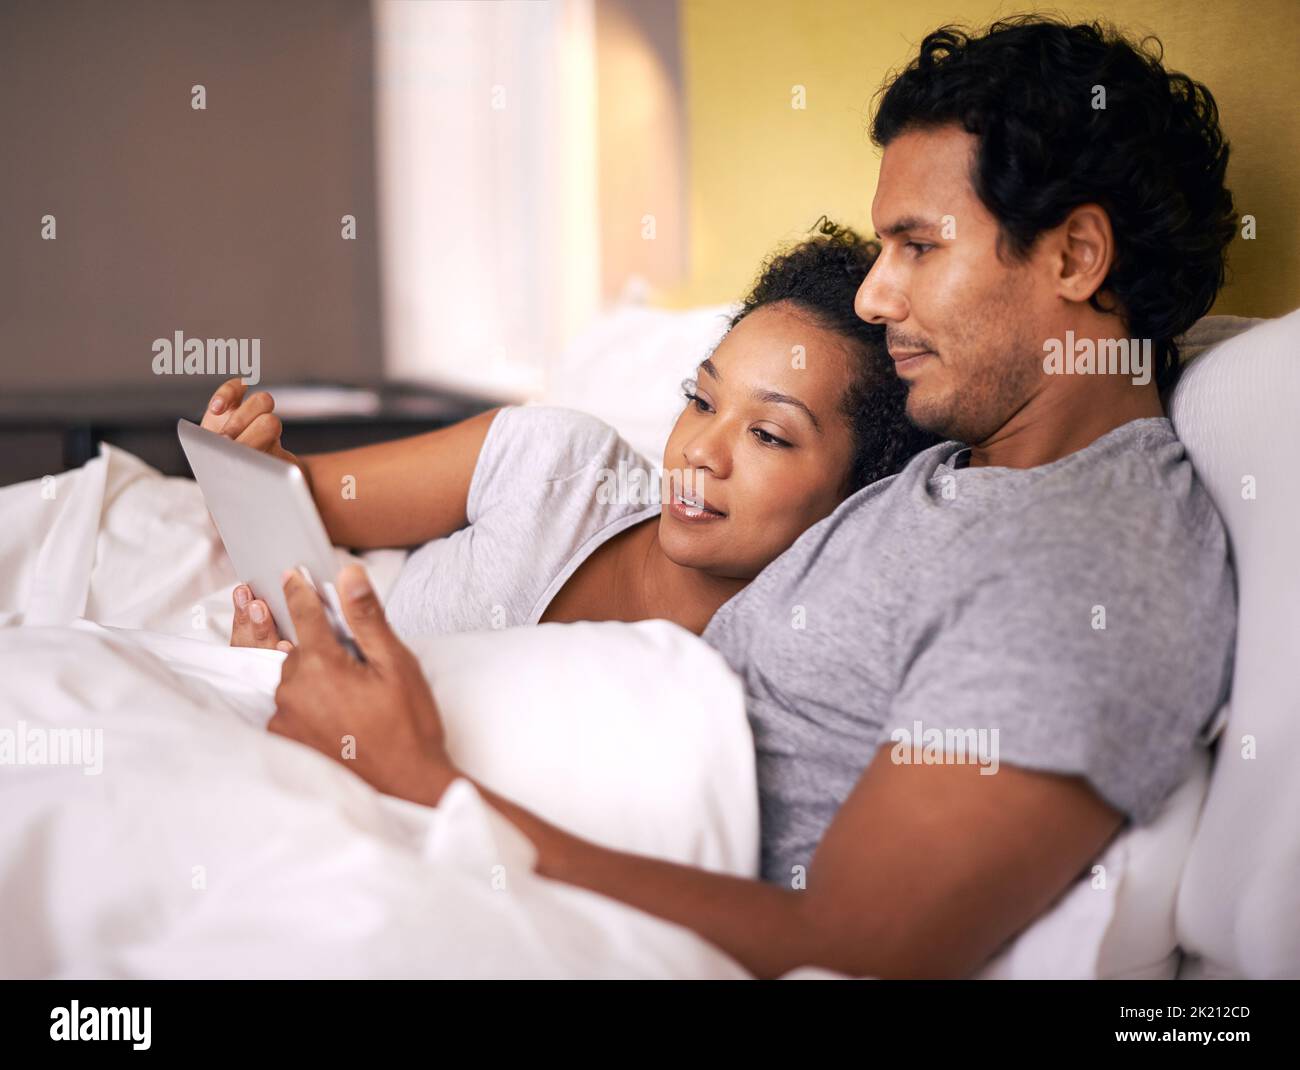 Snuggling while watching our favorite movie. a young couple using a digital tablet while cuddling in bed. Stock Photo